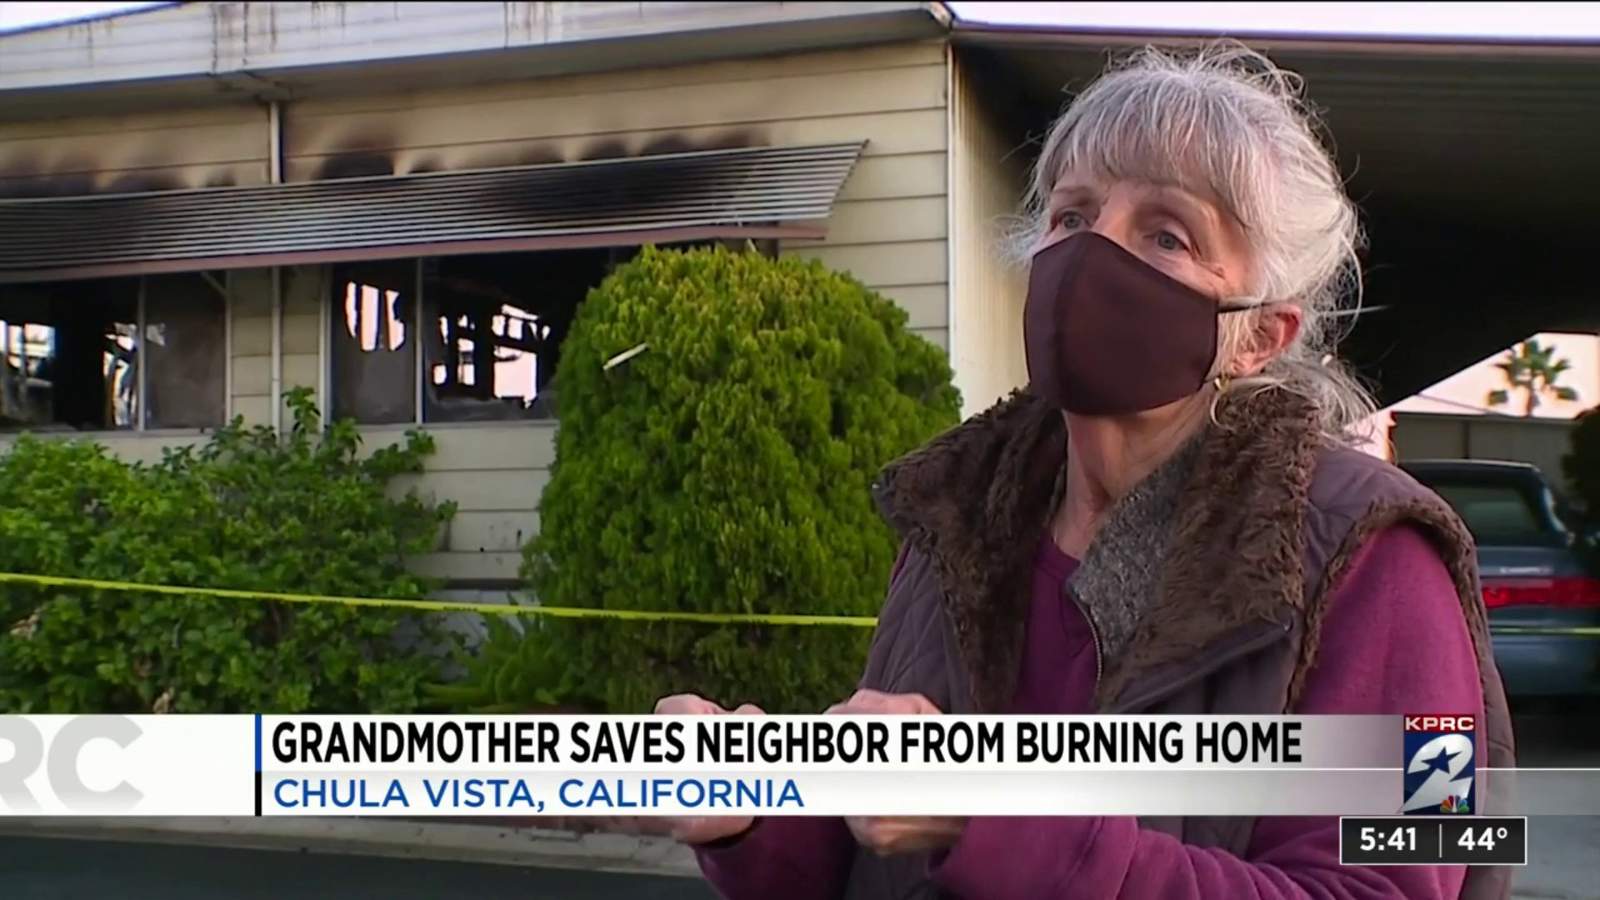 76-year-old woman saves neighbors from burning home